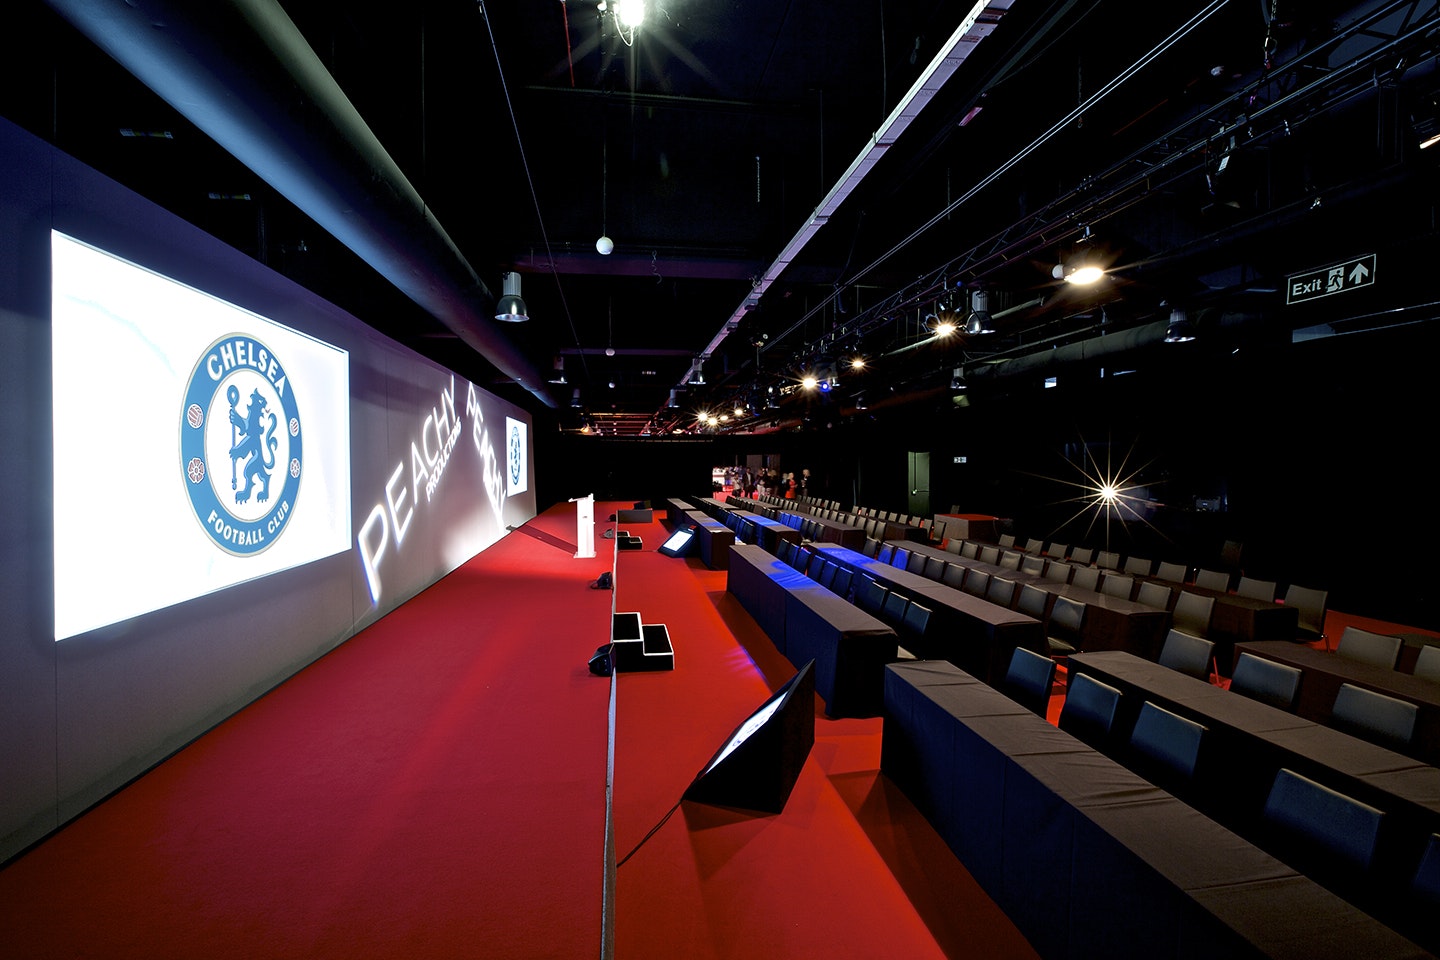 Chelsea Football Club - The Great Hall image 2